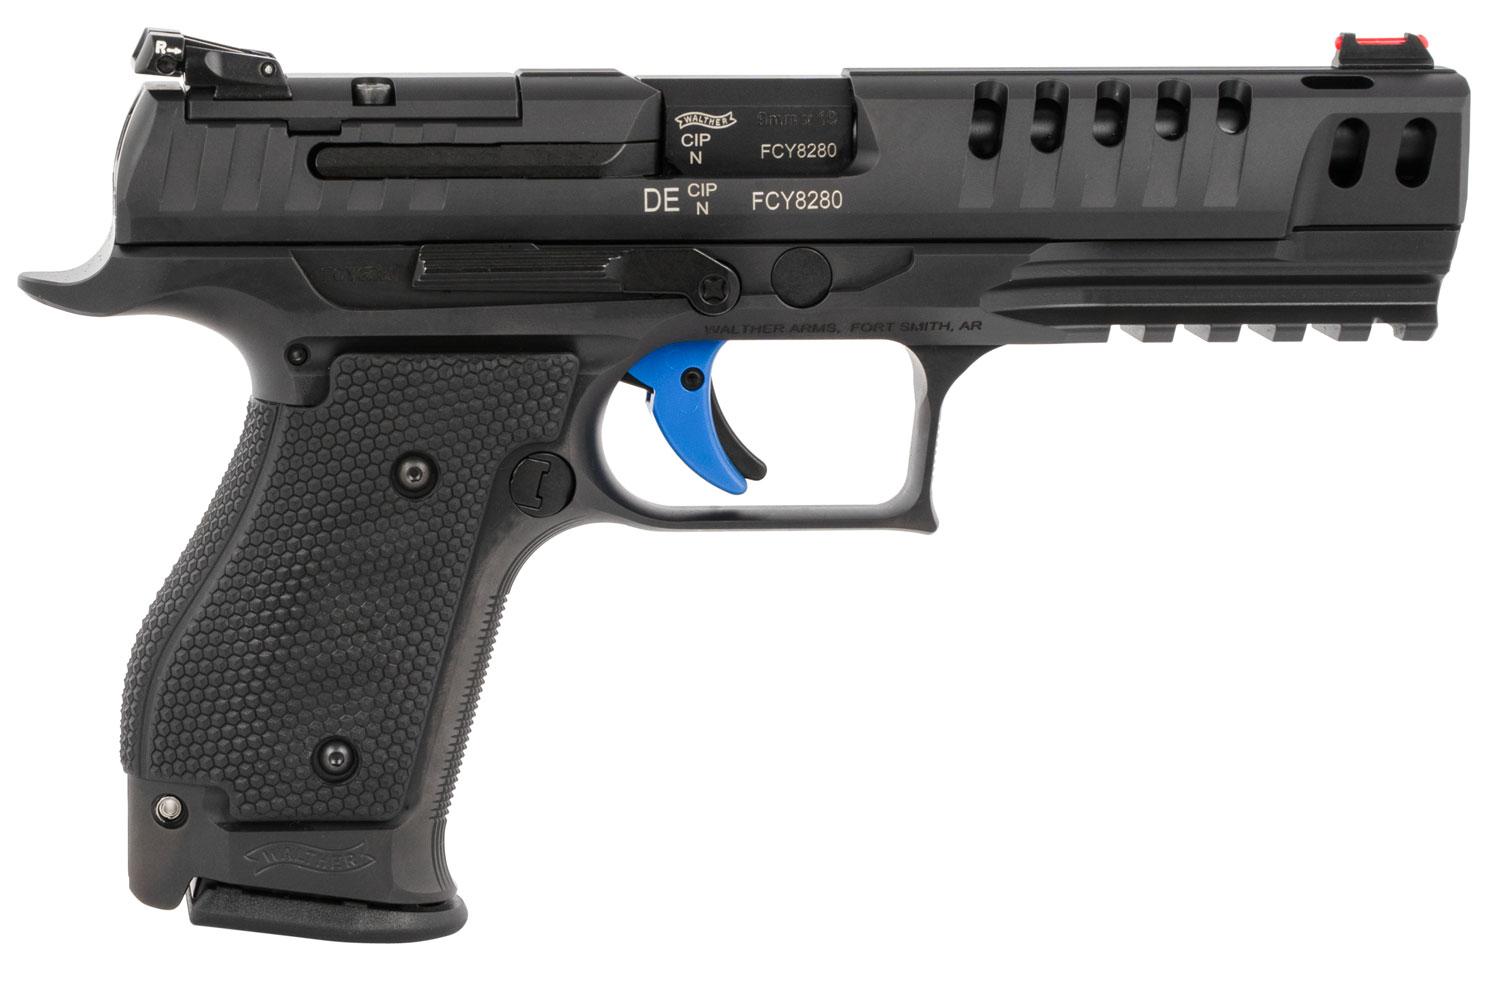 WALTHER PPQ M2 Q5 Match SF 9mm 15rd - $1431.99 (e-mail for price) (Free S/H on Firearms)